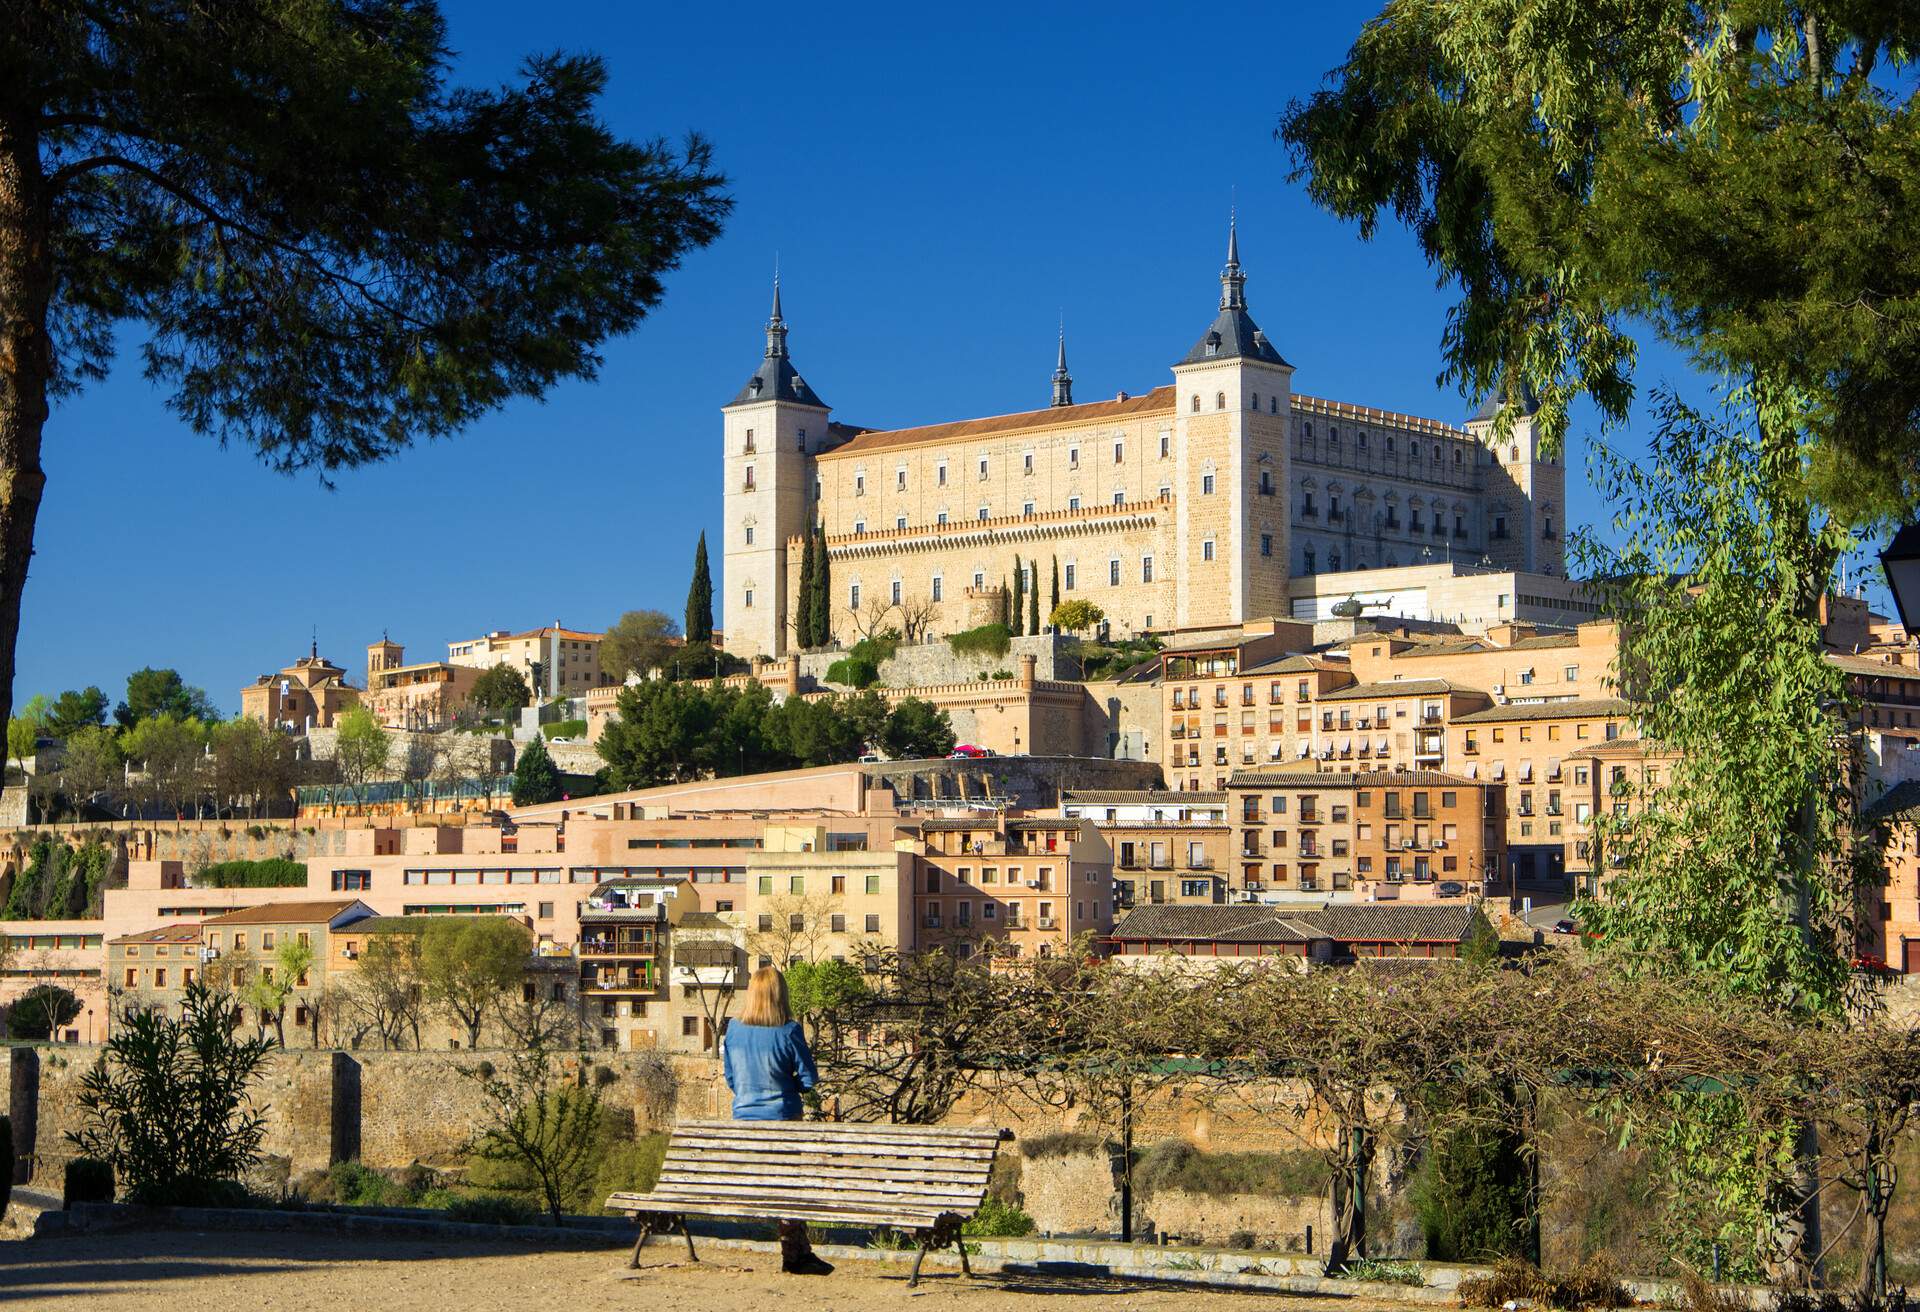 Toledo panoramic view, Toledo, Spain. The best way to see the landscape of Toledo is outside the town.